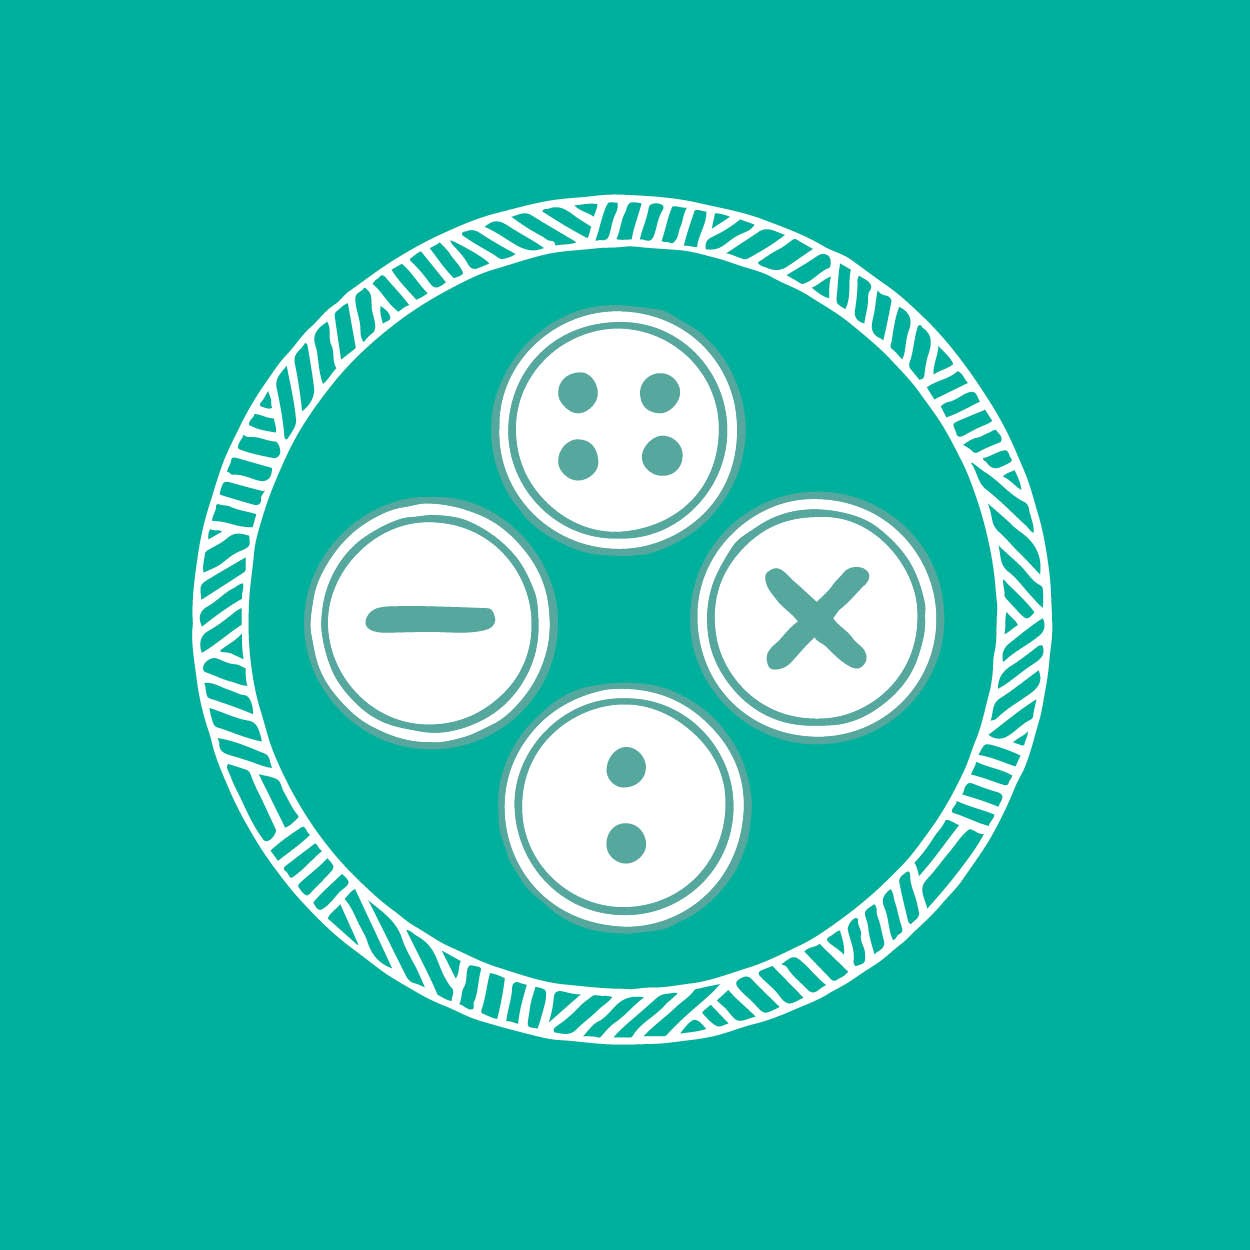 Icon designed by Sandeep Johal: Four buttons with differing shapes of holes